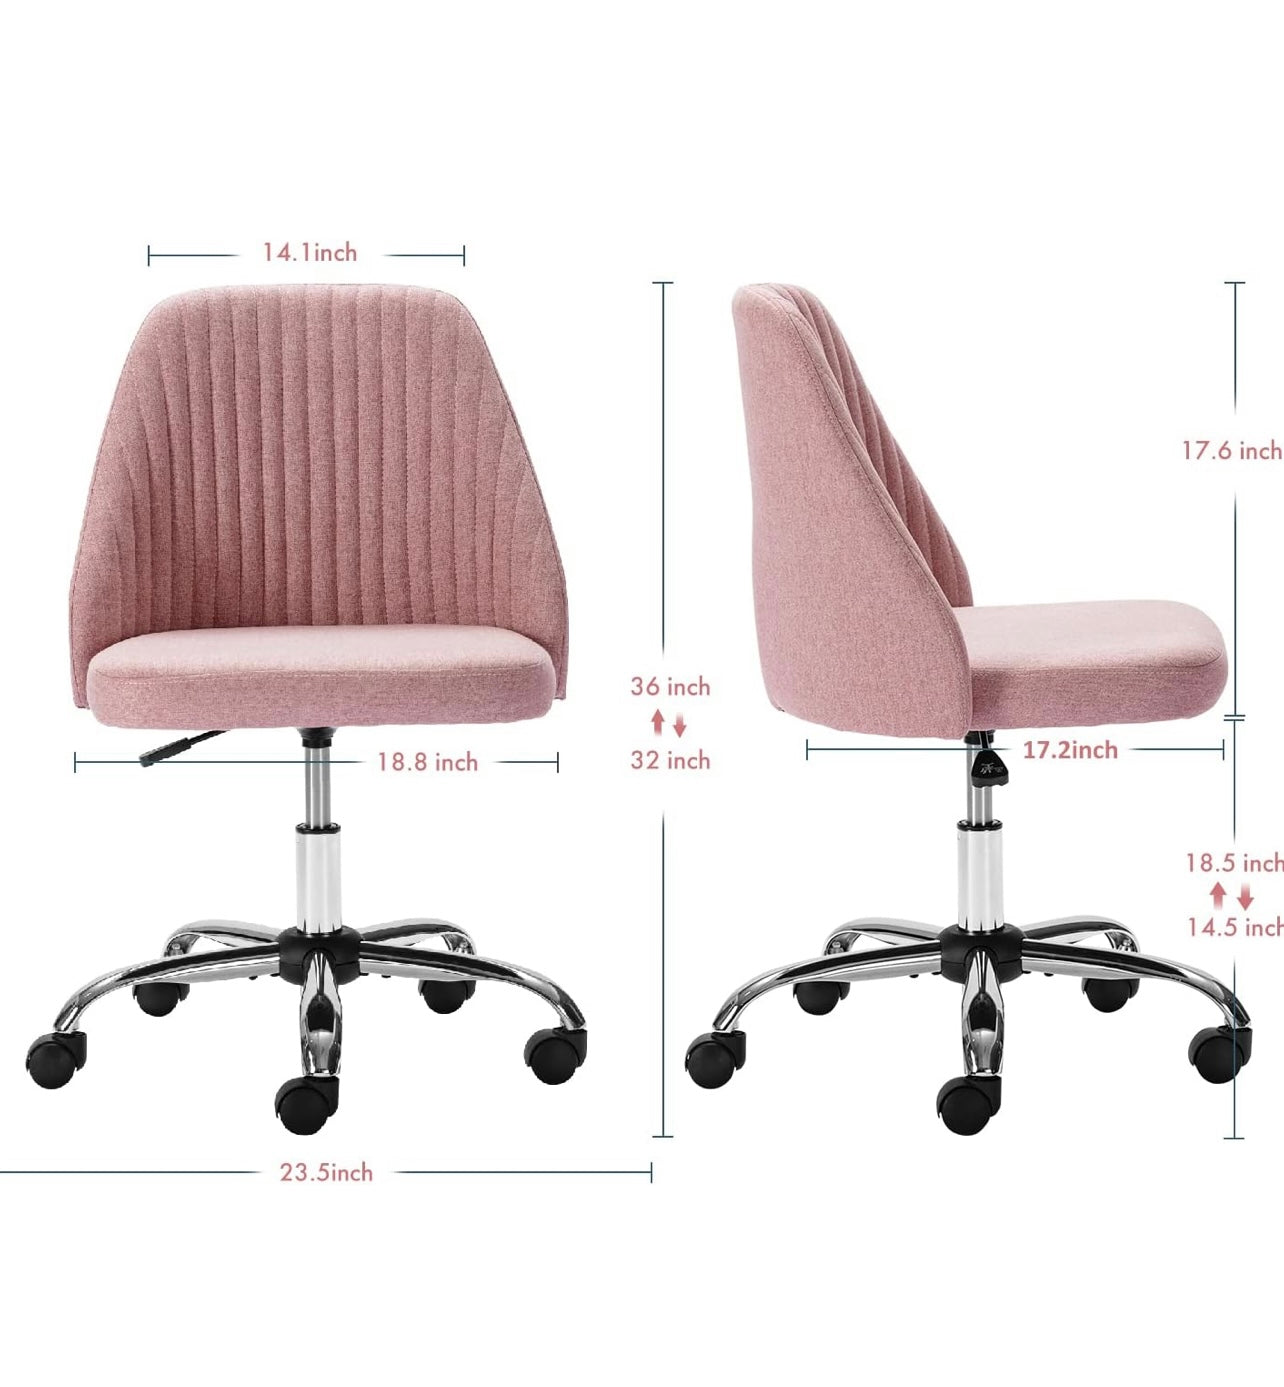 Home Office Chair, Mid-Back Armless Twill Fabric Adjustable Swivel Task Chair for Small Space, Living Room, Make-up, Studying